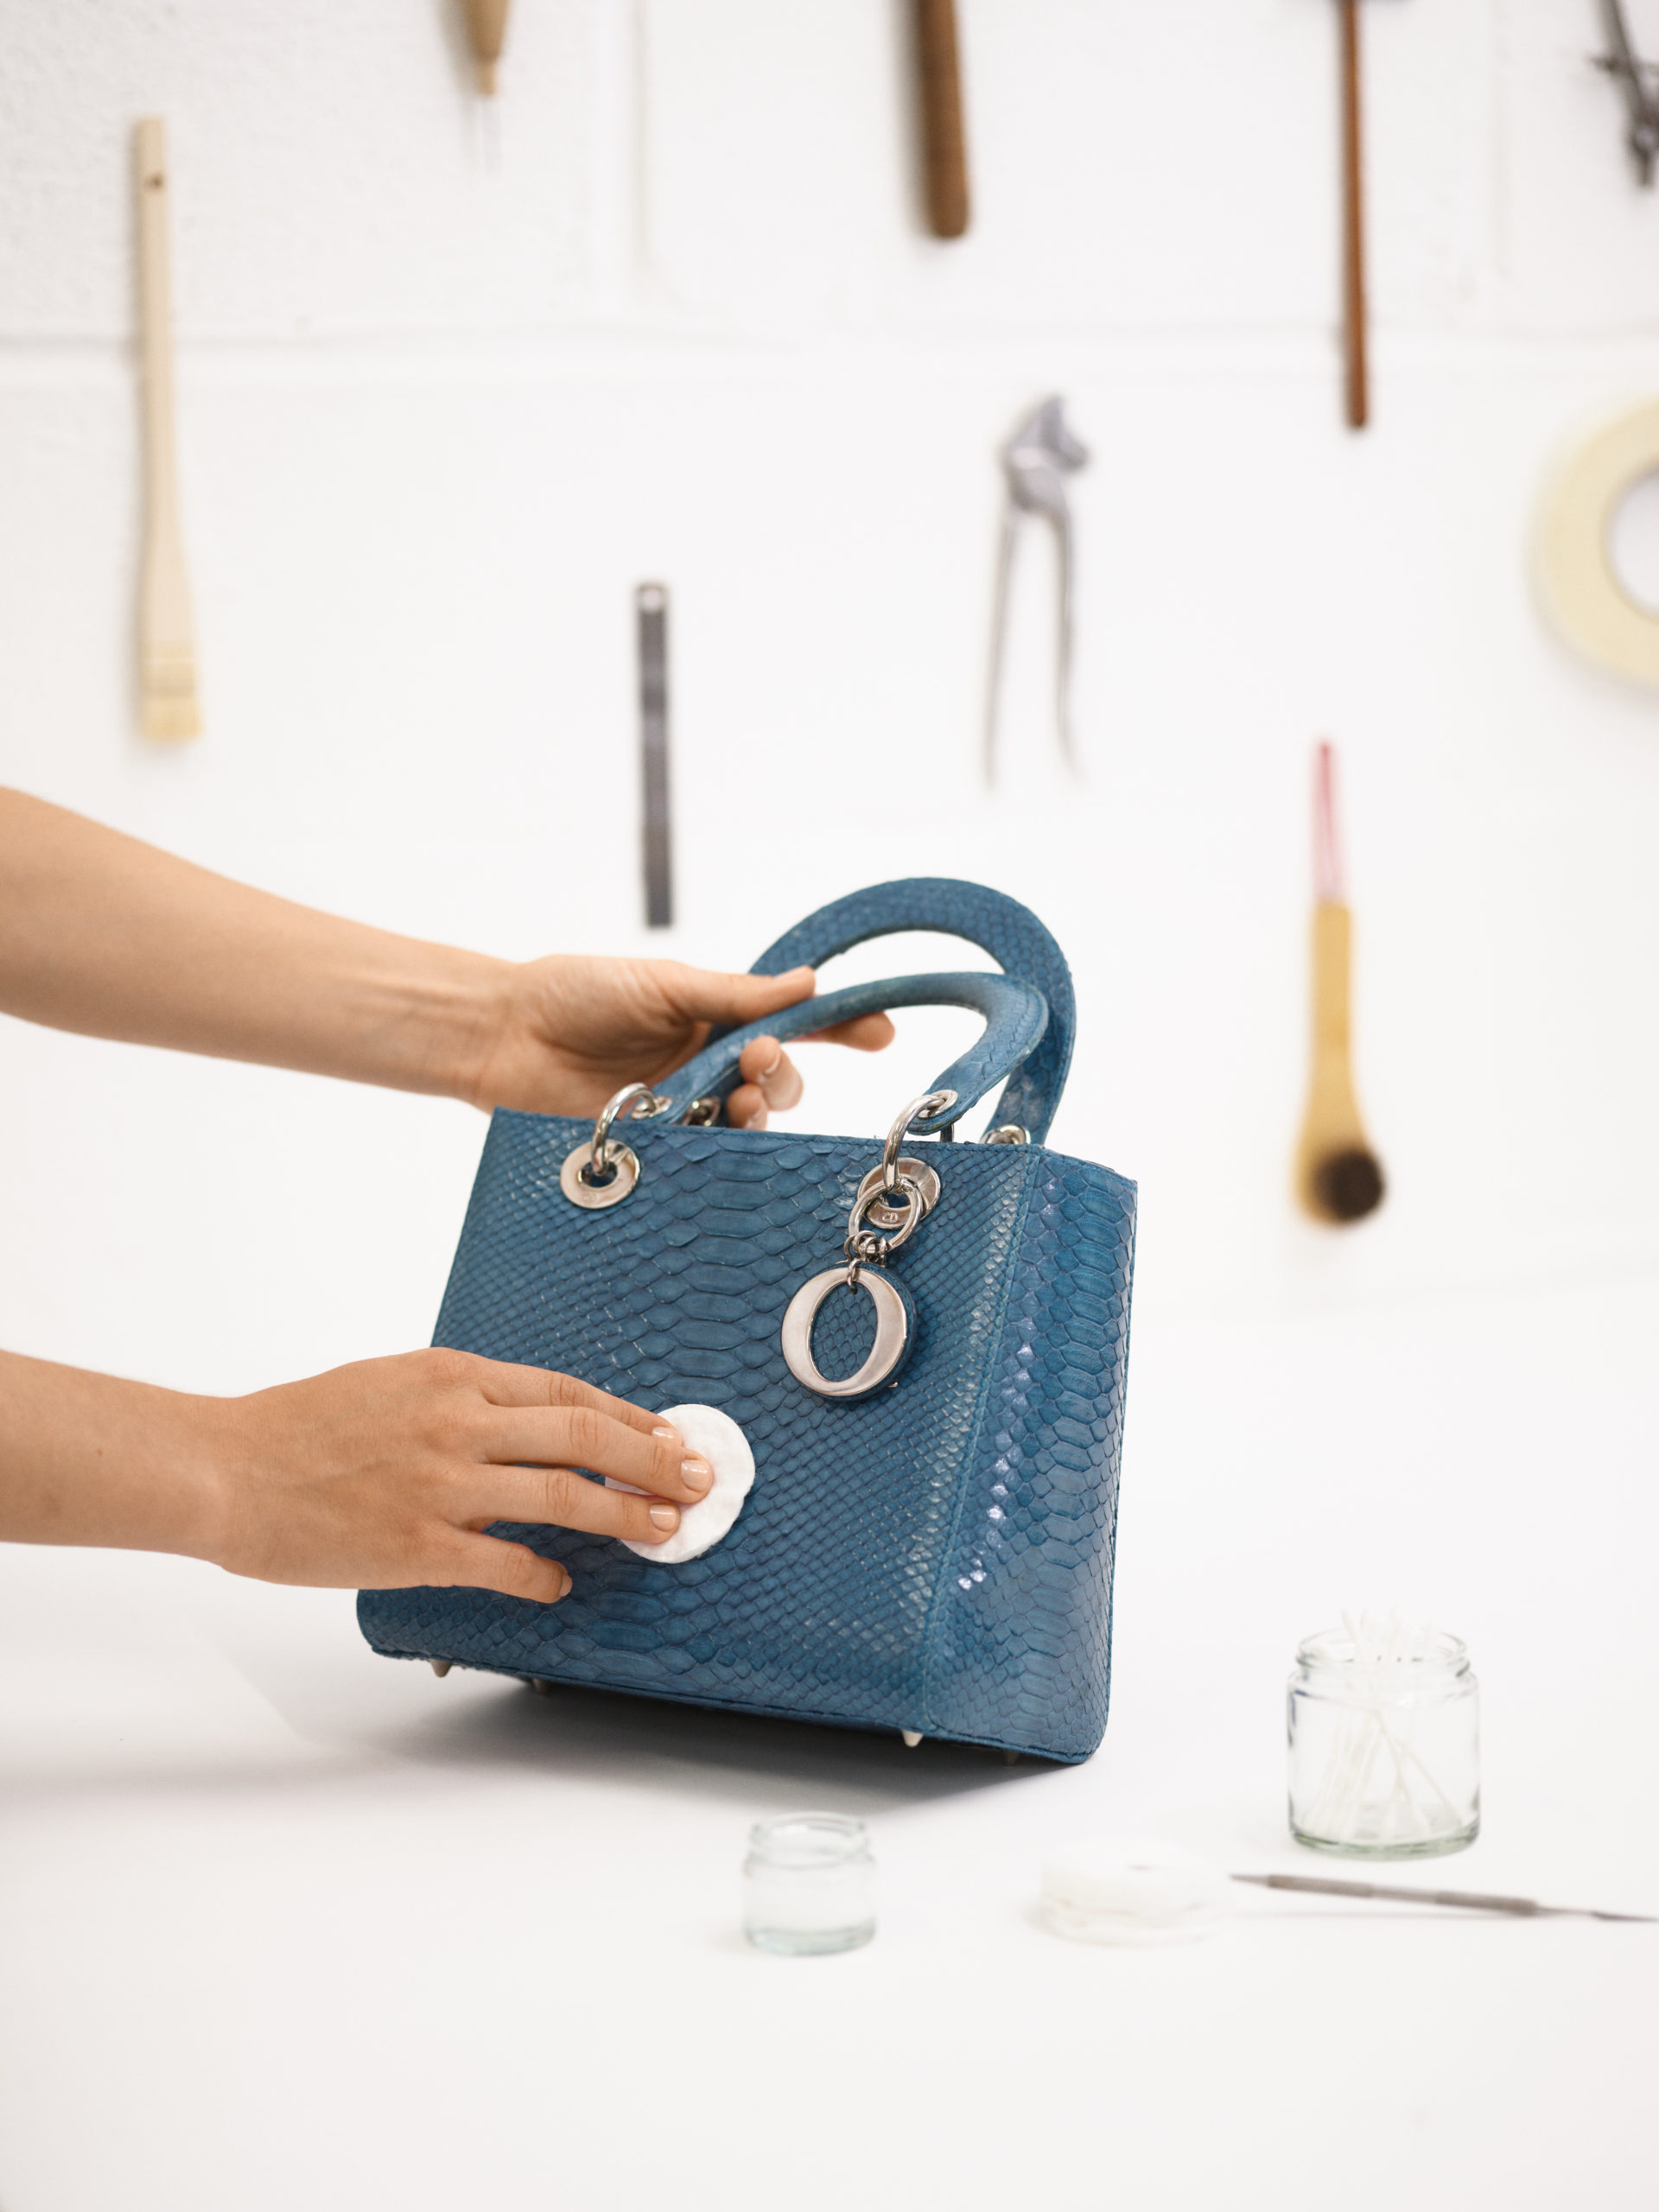 How To Care for Exotic Leather Bags